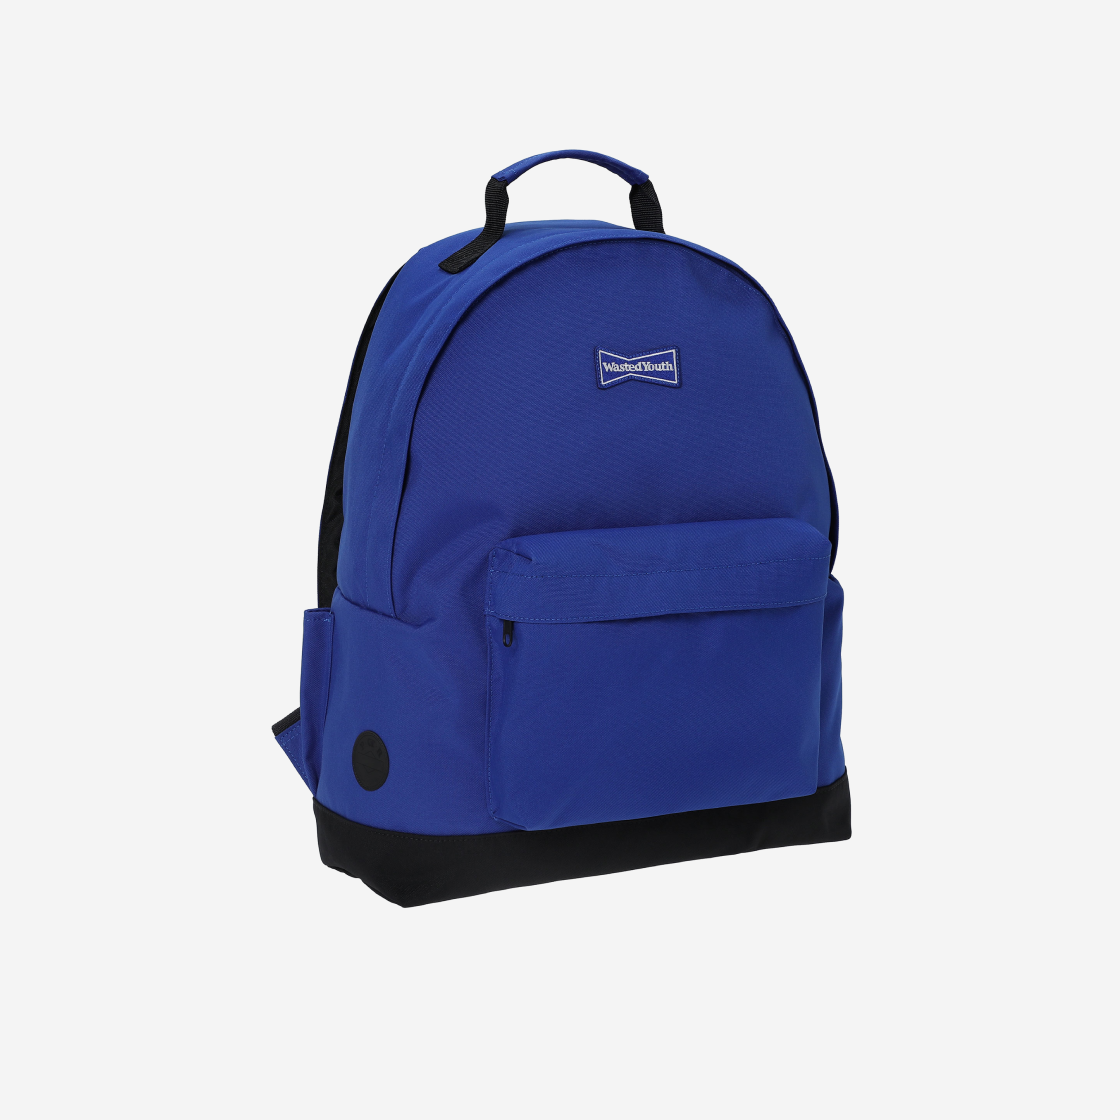 BLUE】POTR X WASTED YOUTH DAY PACK-